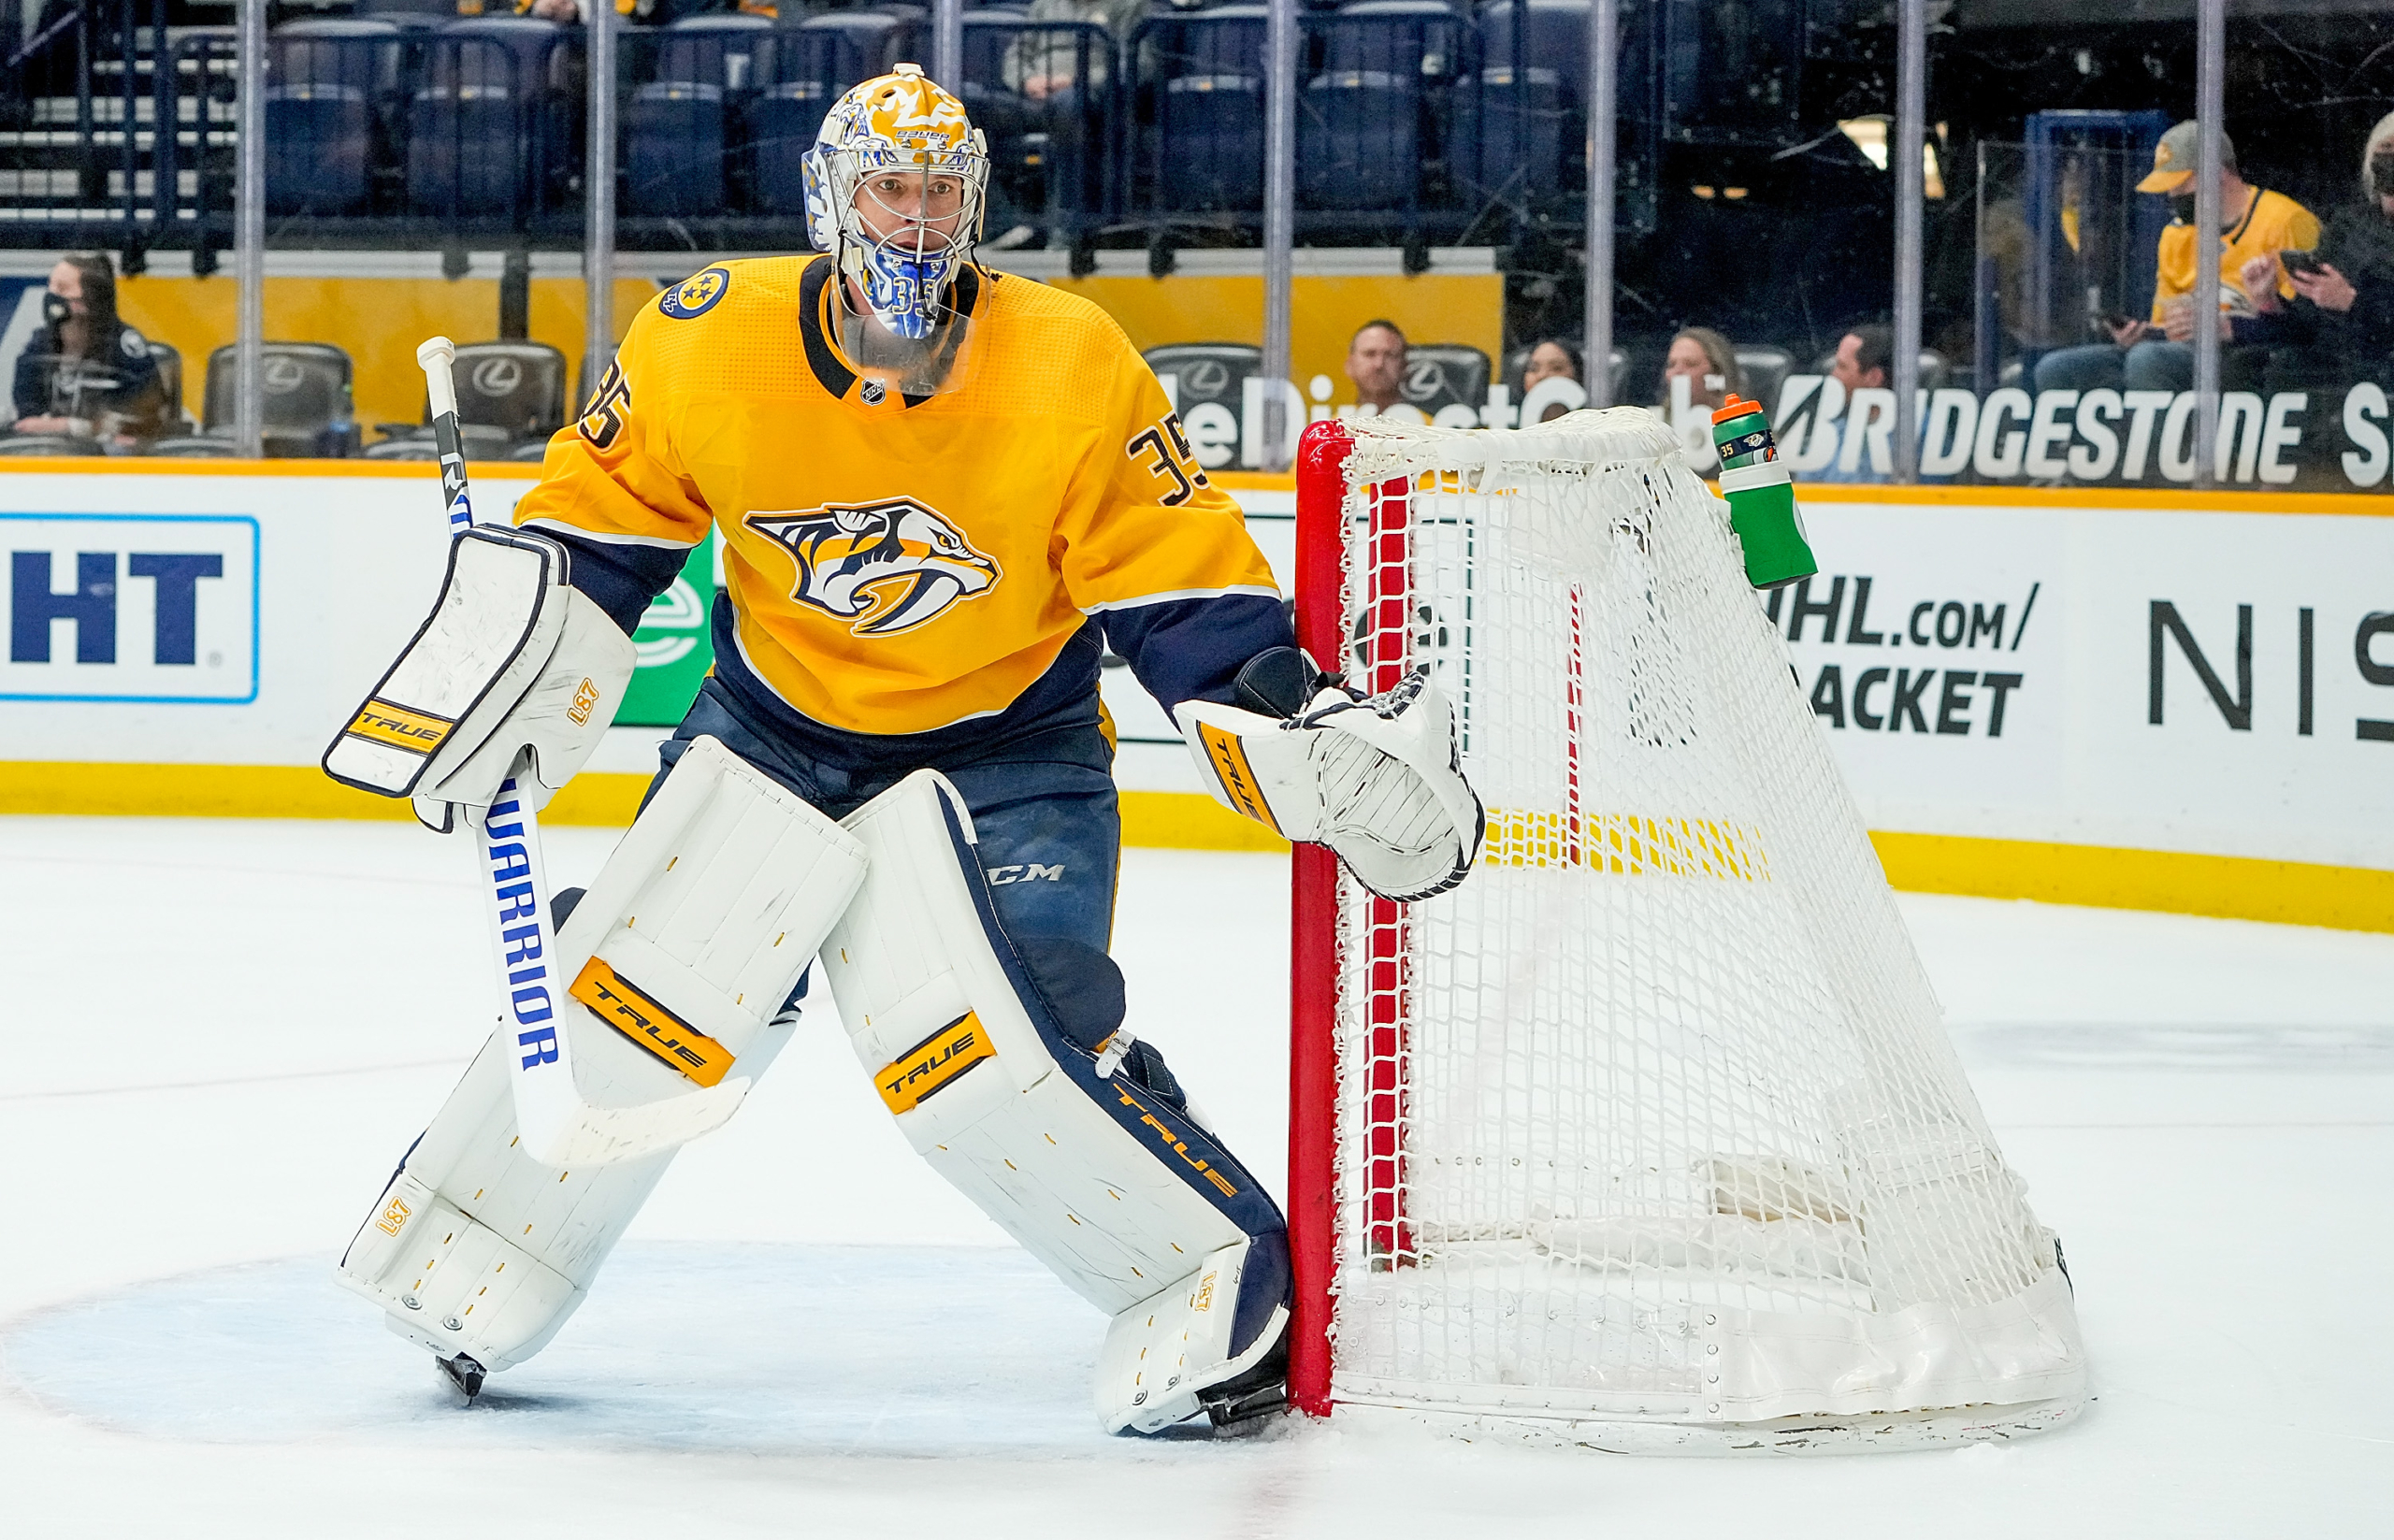 BREAKING: Pekka Rinne Retires After 15 Years With The Nashville Predators -  The Sports Credential